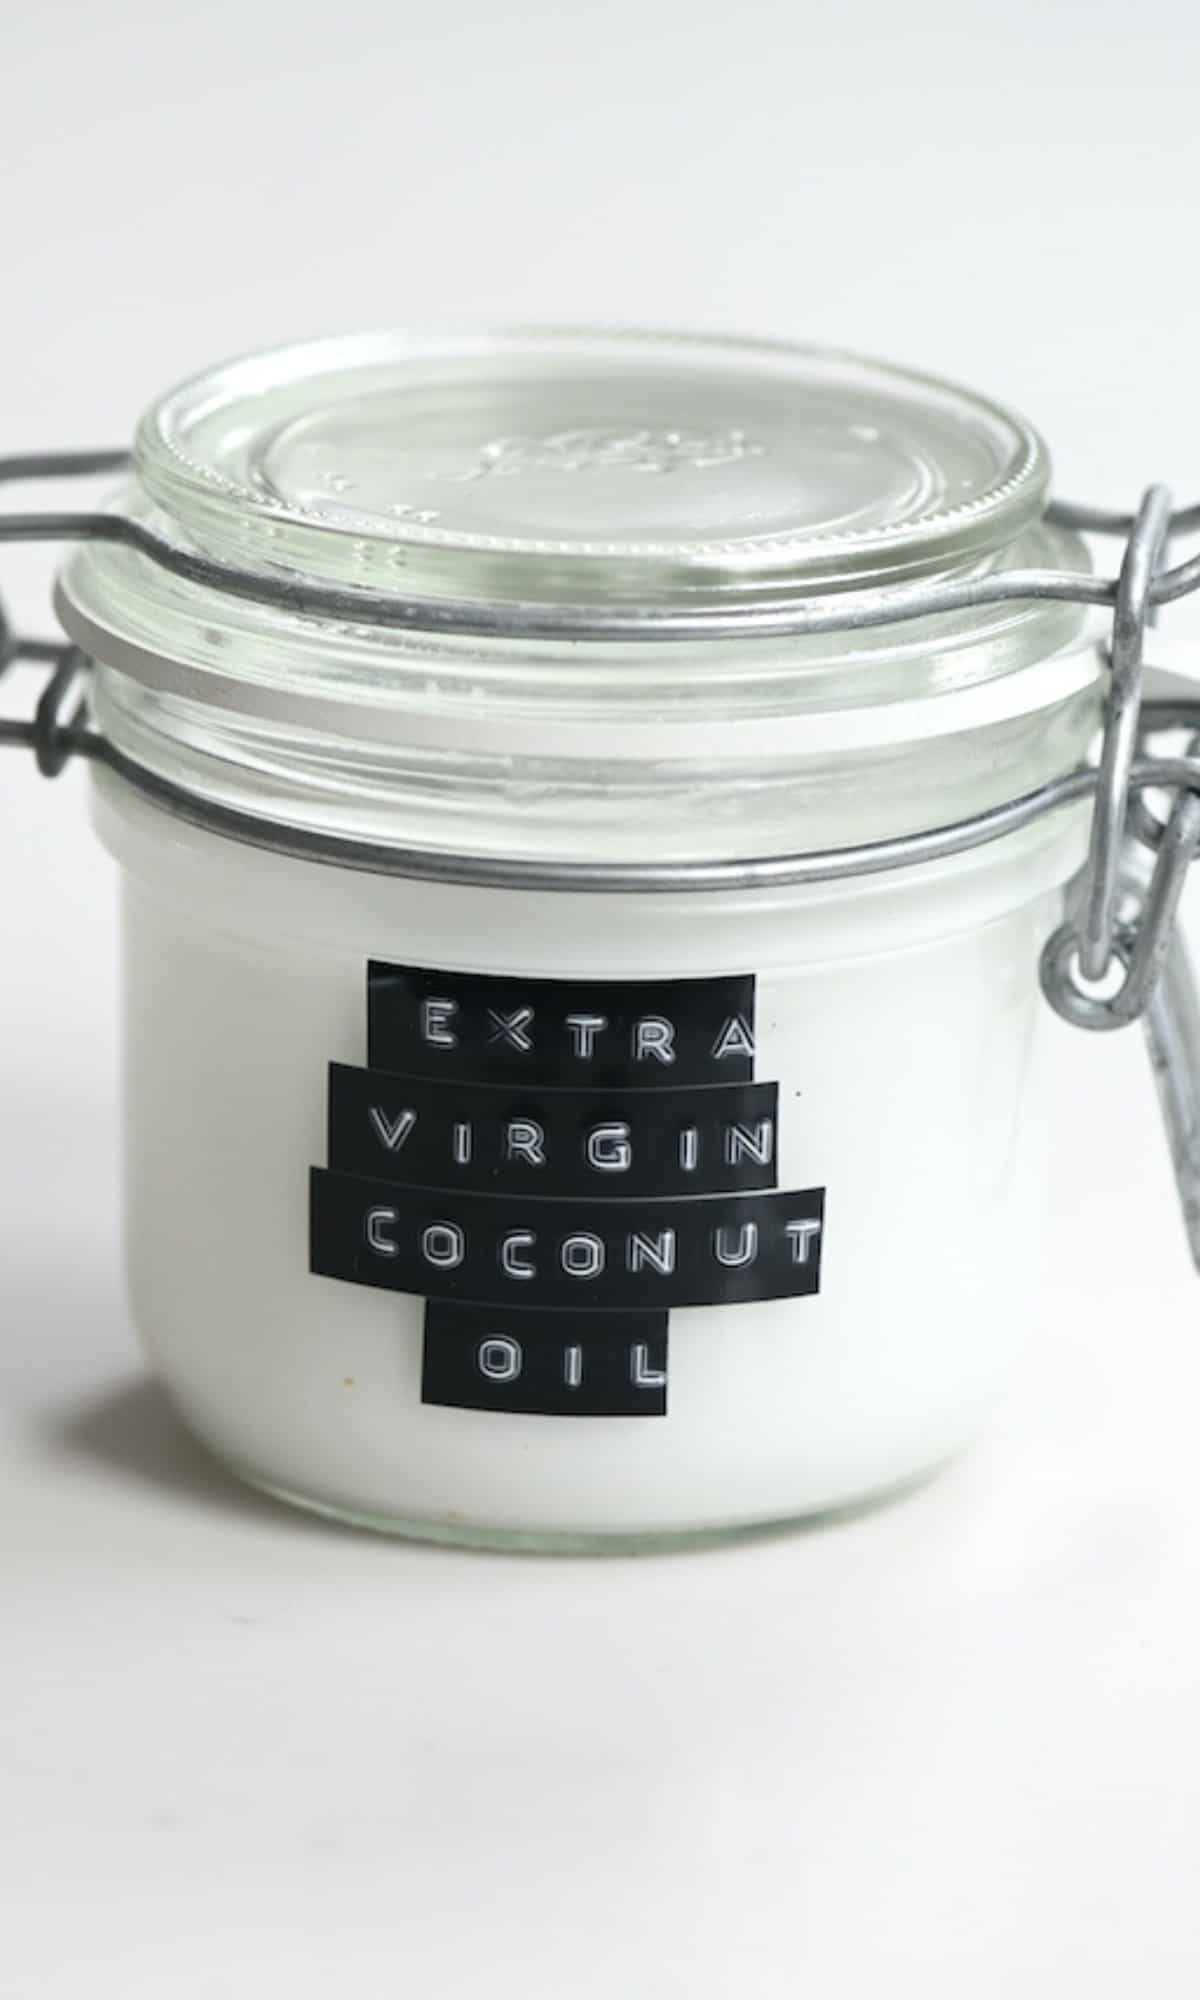 A closed jar with extra virgin coconut oil